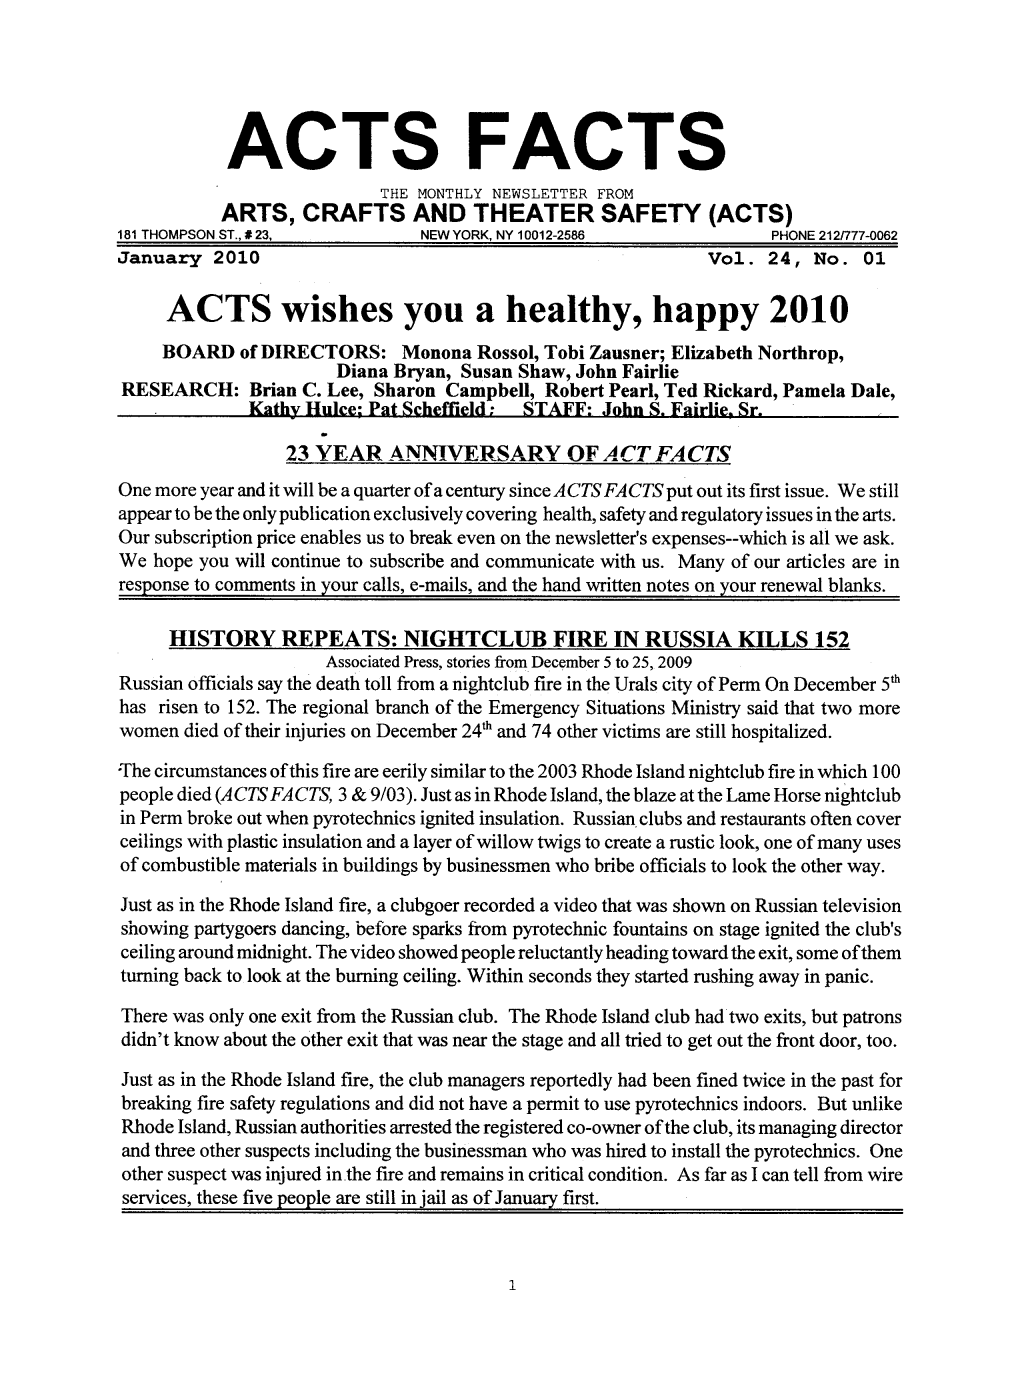 Acts Facts the Monthly Newsletter from Arts, Crafts and Theater Safety (Acts) 181 Thompson St., # 23